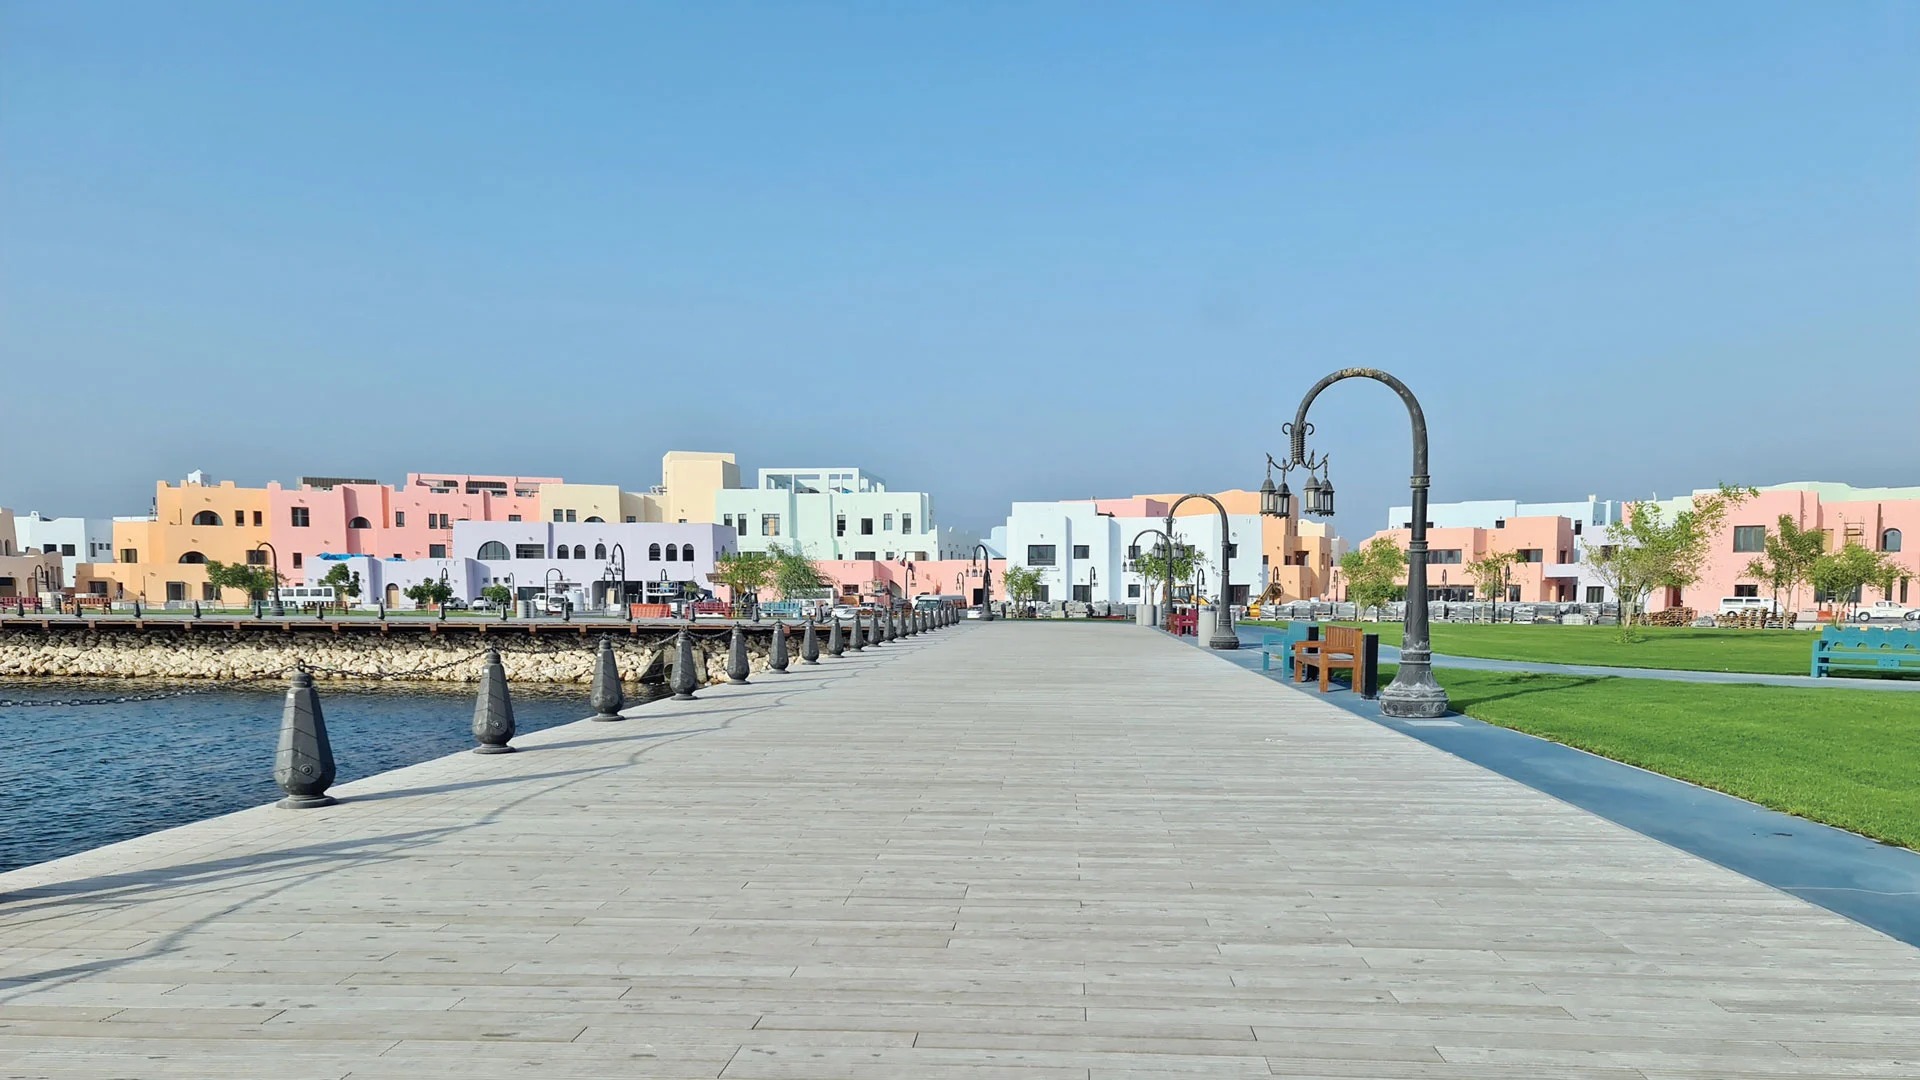 Old Doha Port offers 157 hotel, and apartment rooms